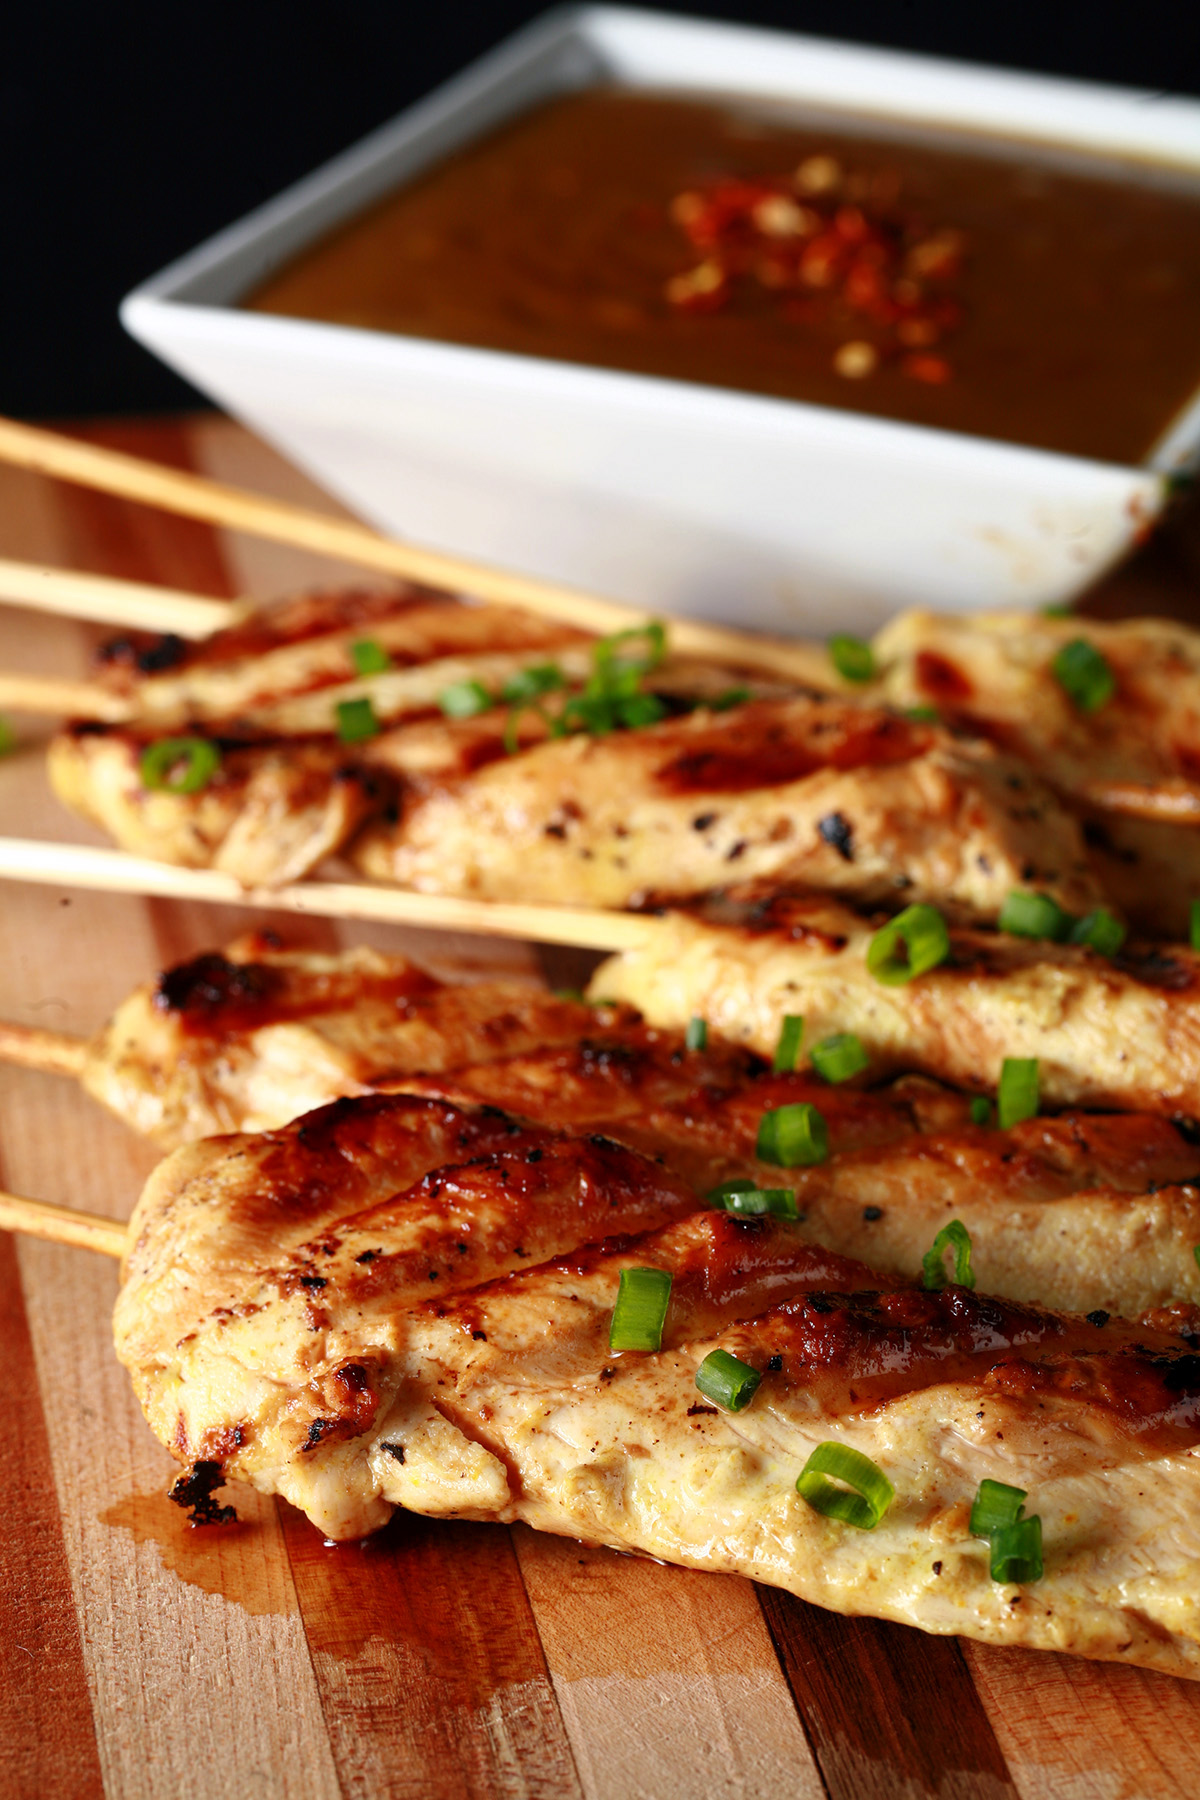 Several skewers of gluten-free chicken satay on a striped cutting board.  They are sprinkled with green onions and sitting next to a bowl of peanut sauce.